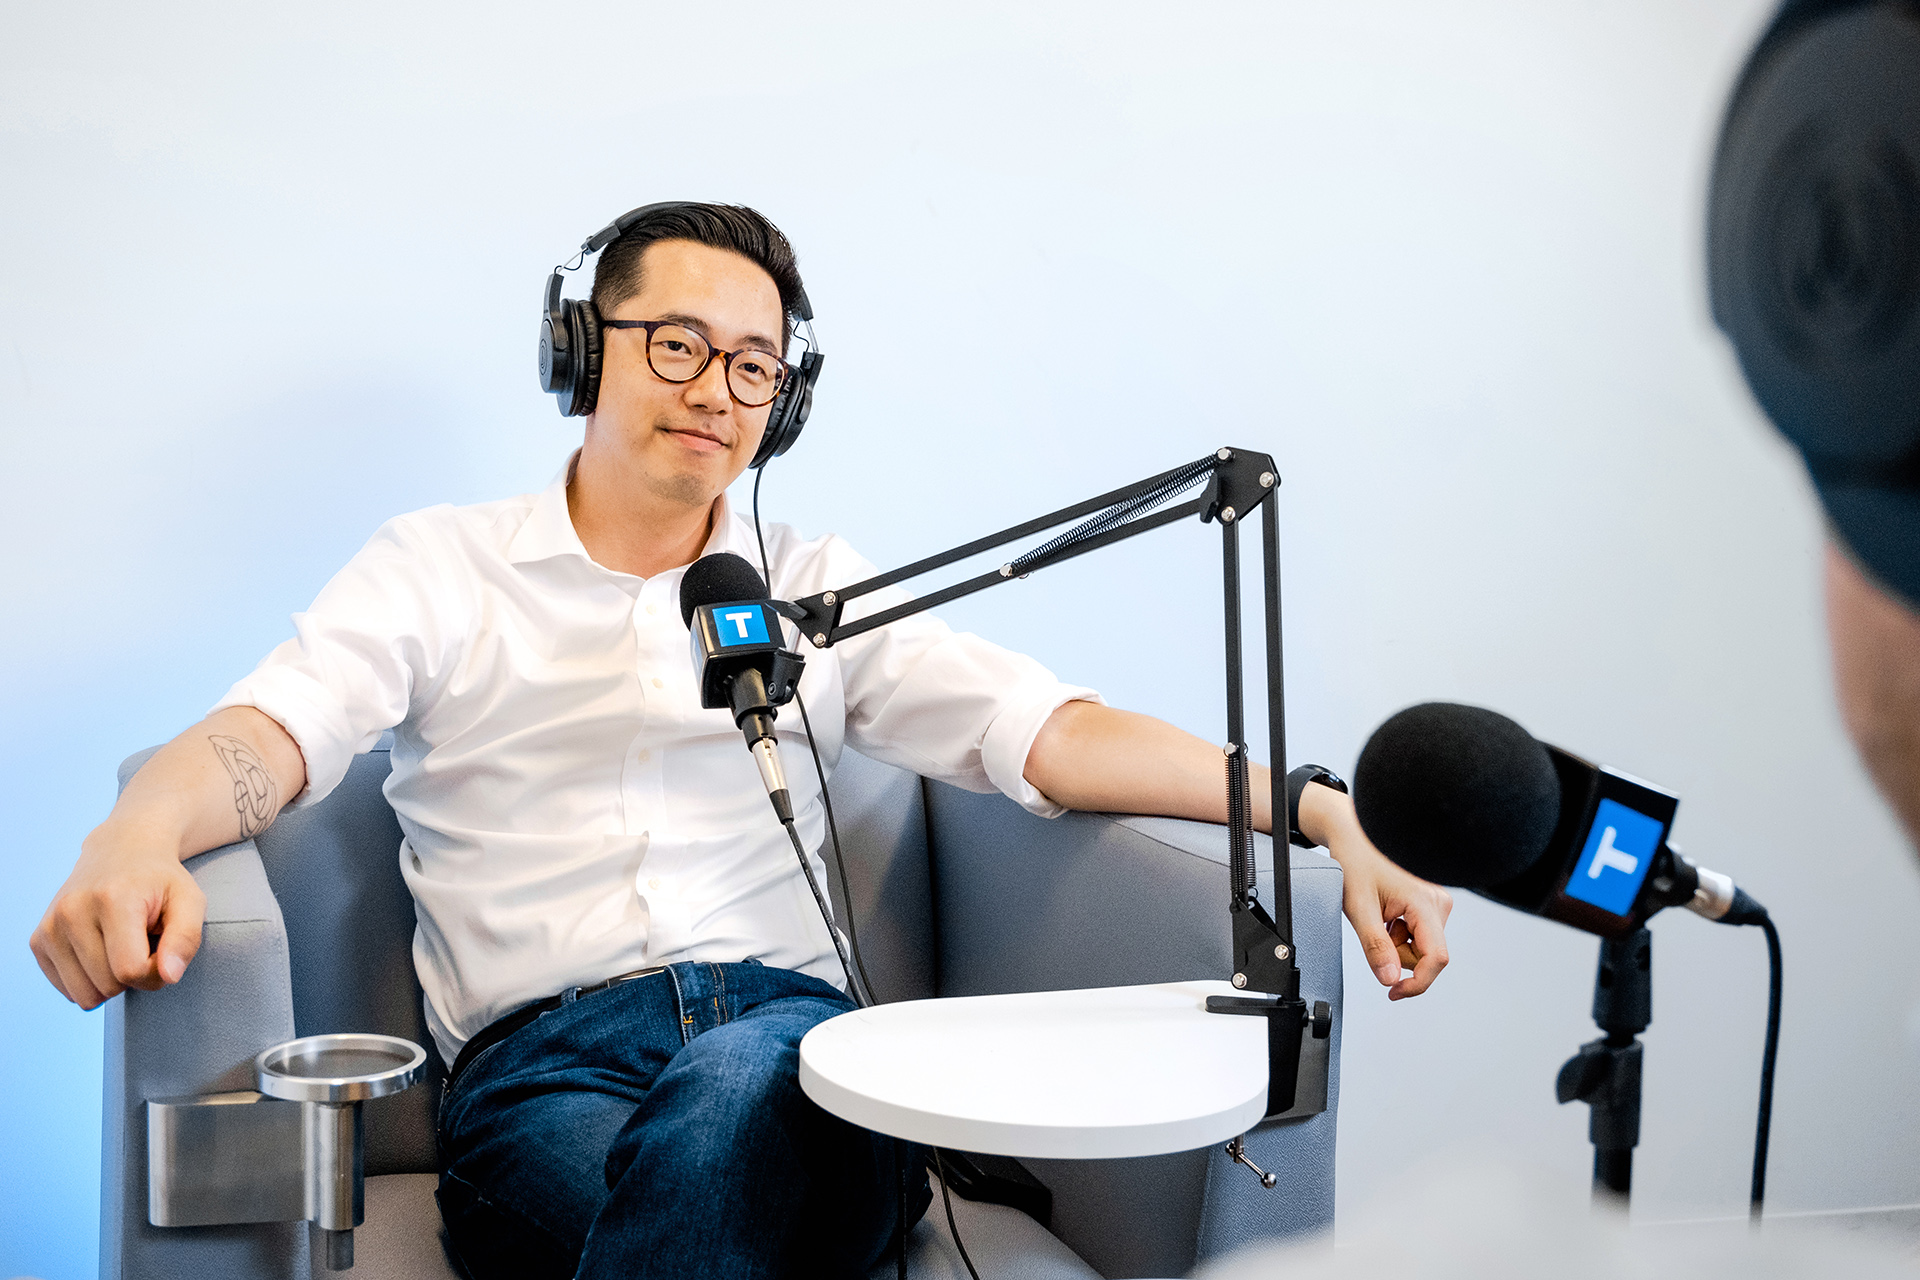 Jawn Jang interviews a person for the TransLink podcast